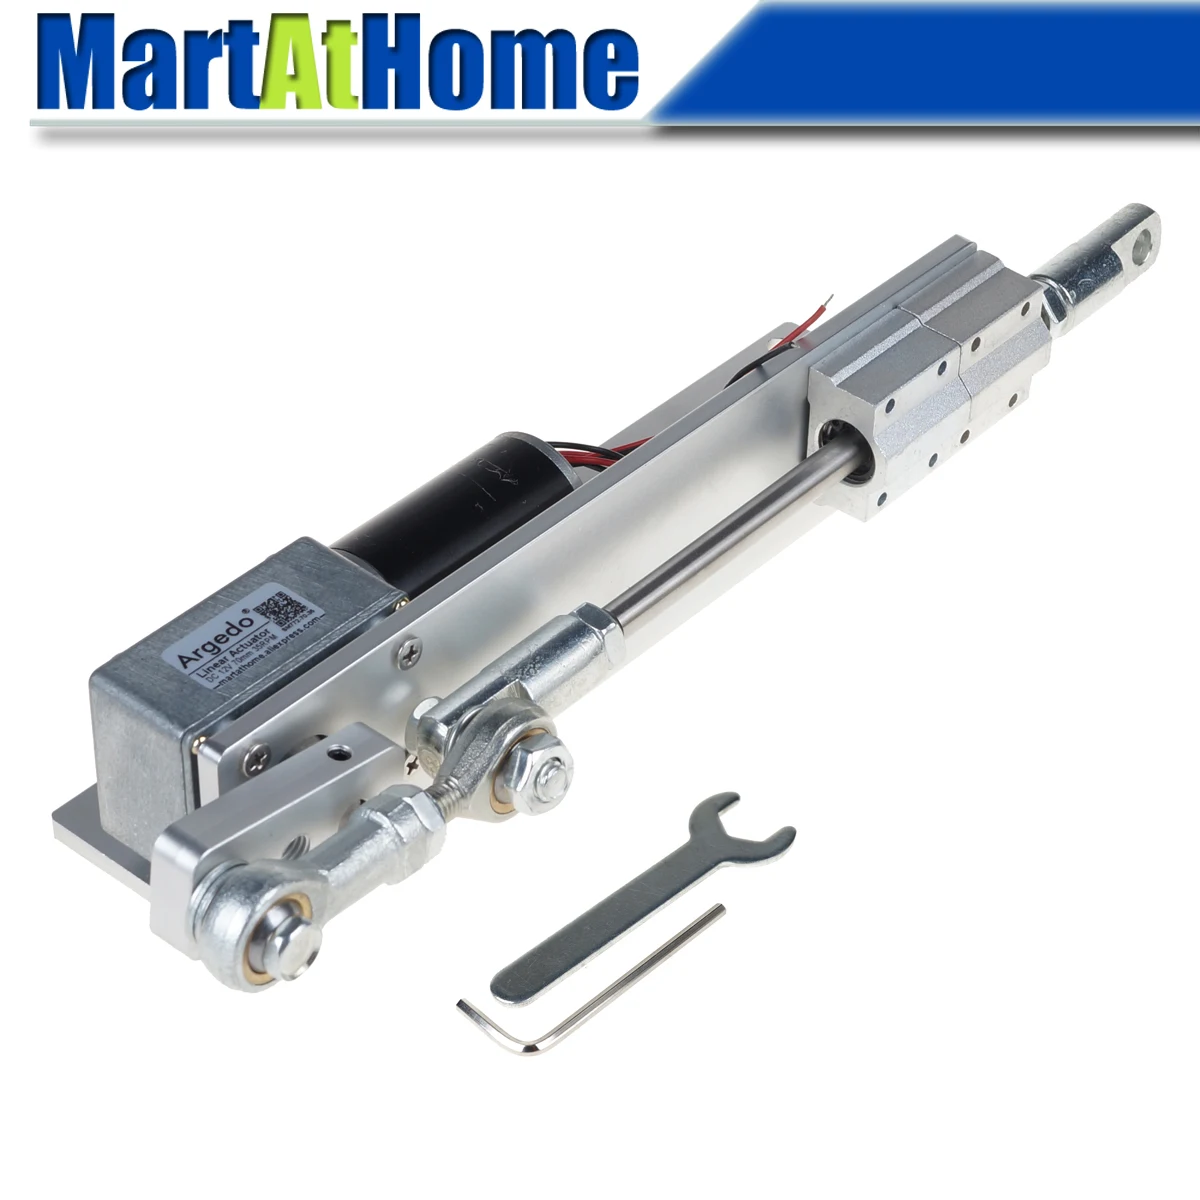 Details about   Linear Actuator Stroke Motor With Stand Reciprocating Motion Speed Regulation 